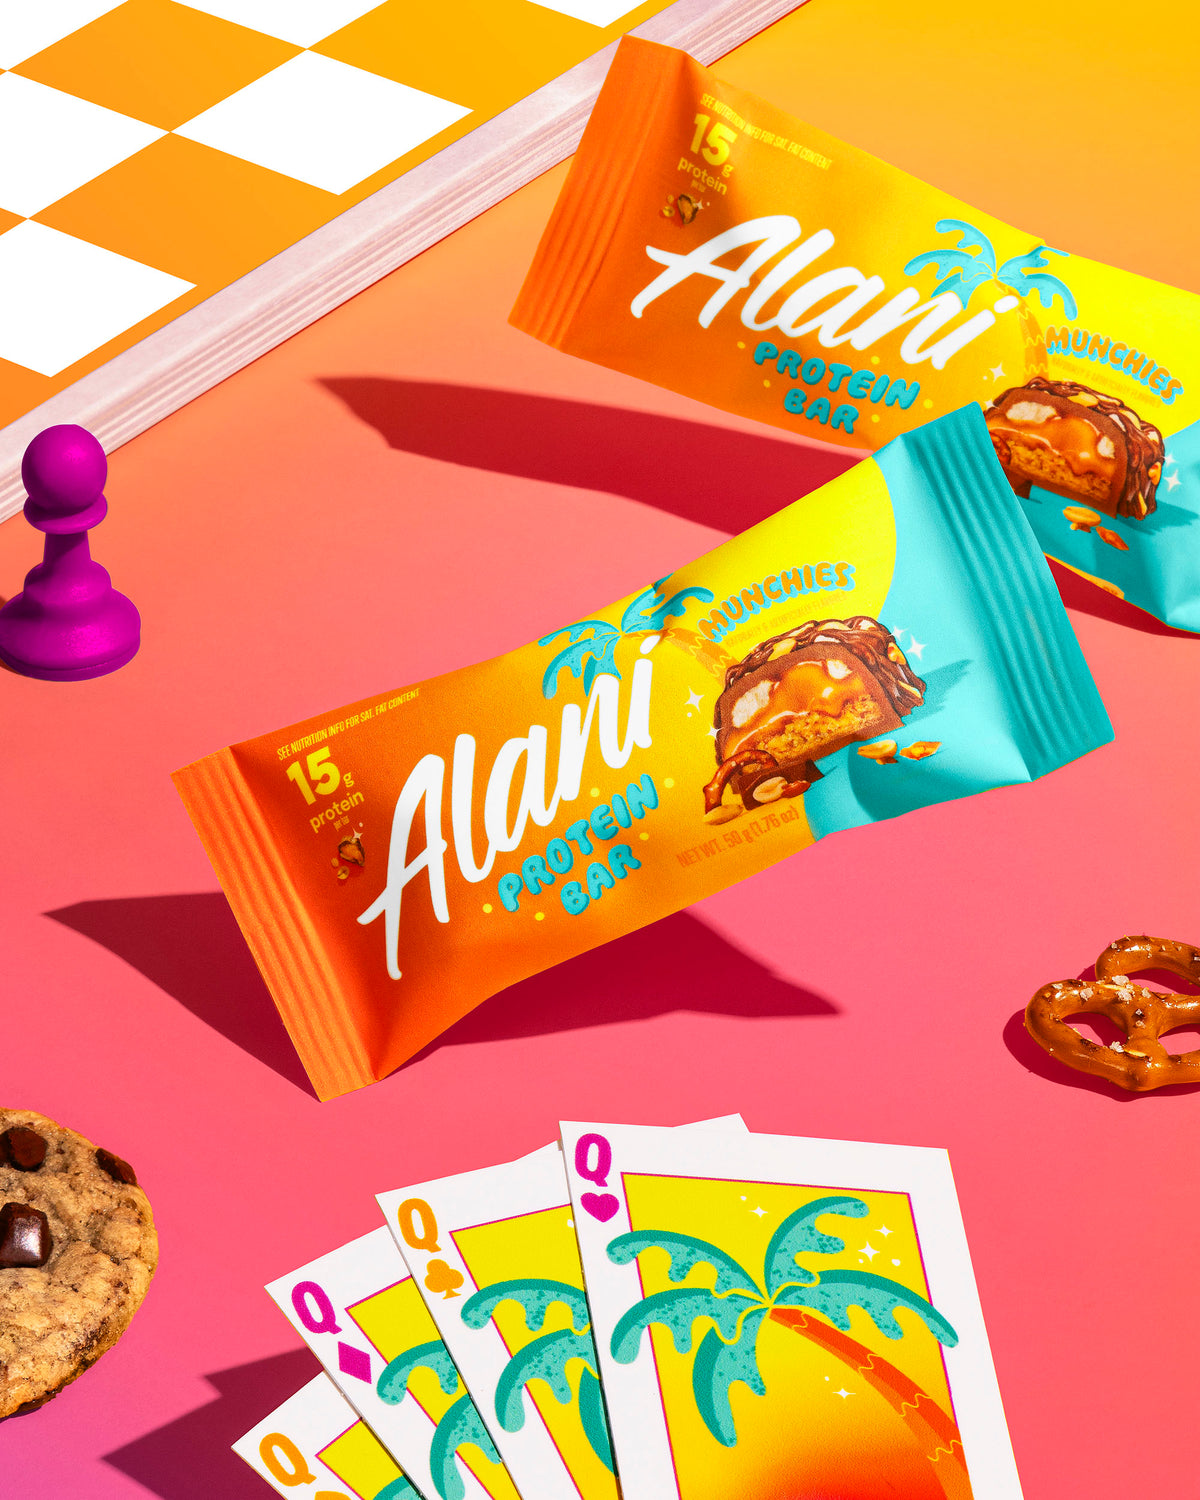 Two protein bars in flavor munchies are displayed next to a set of chess and cookies.